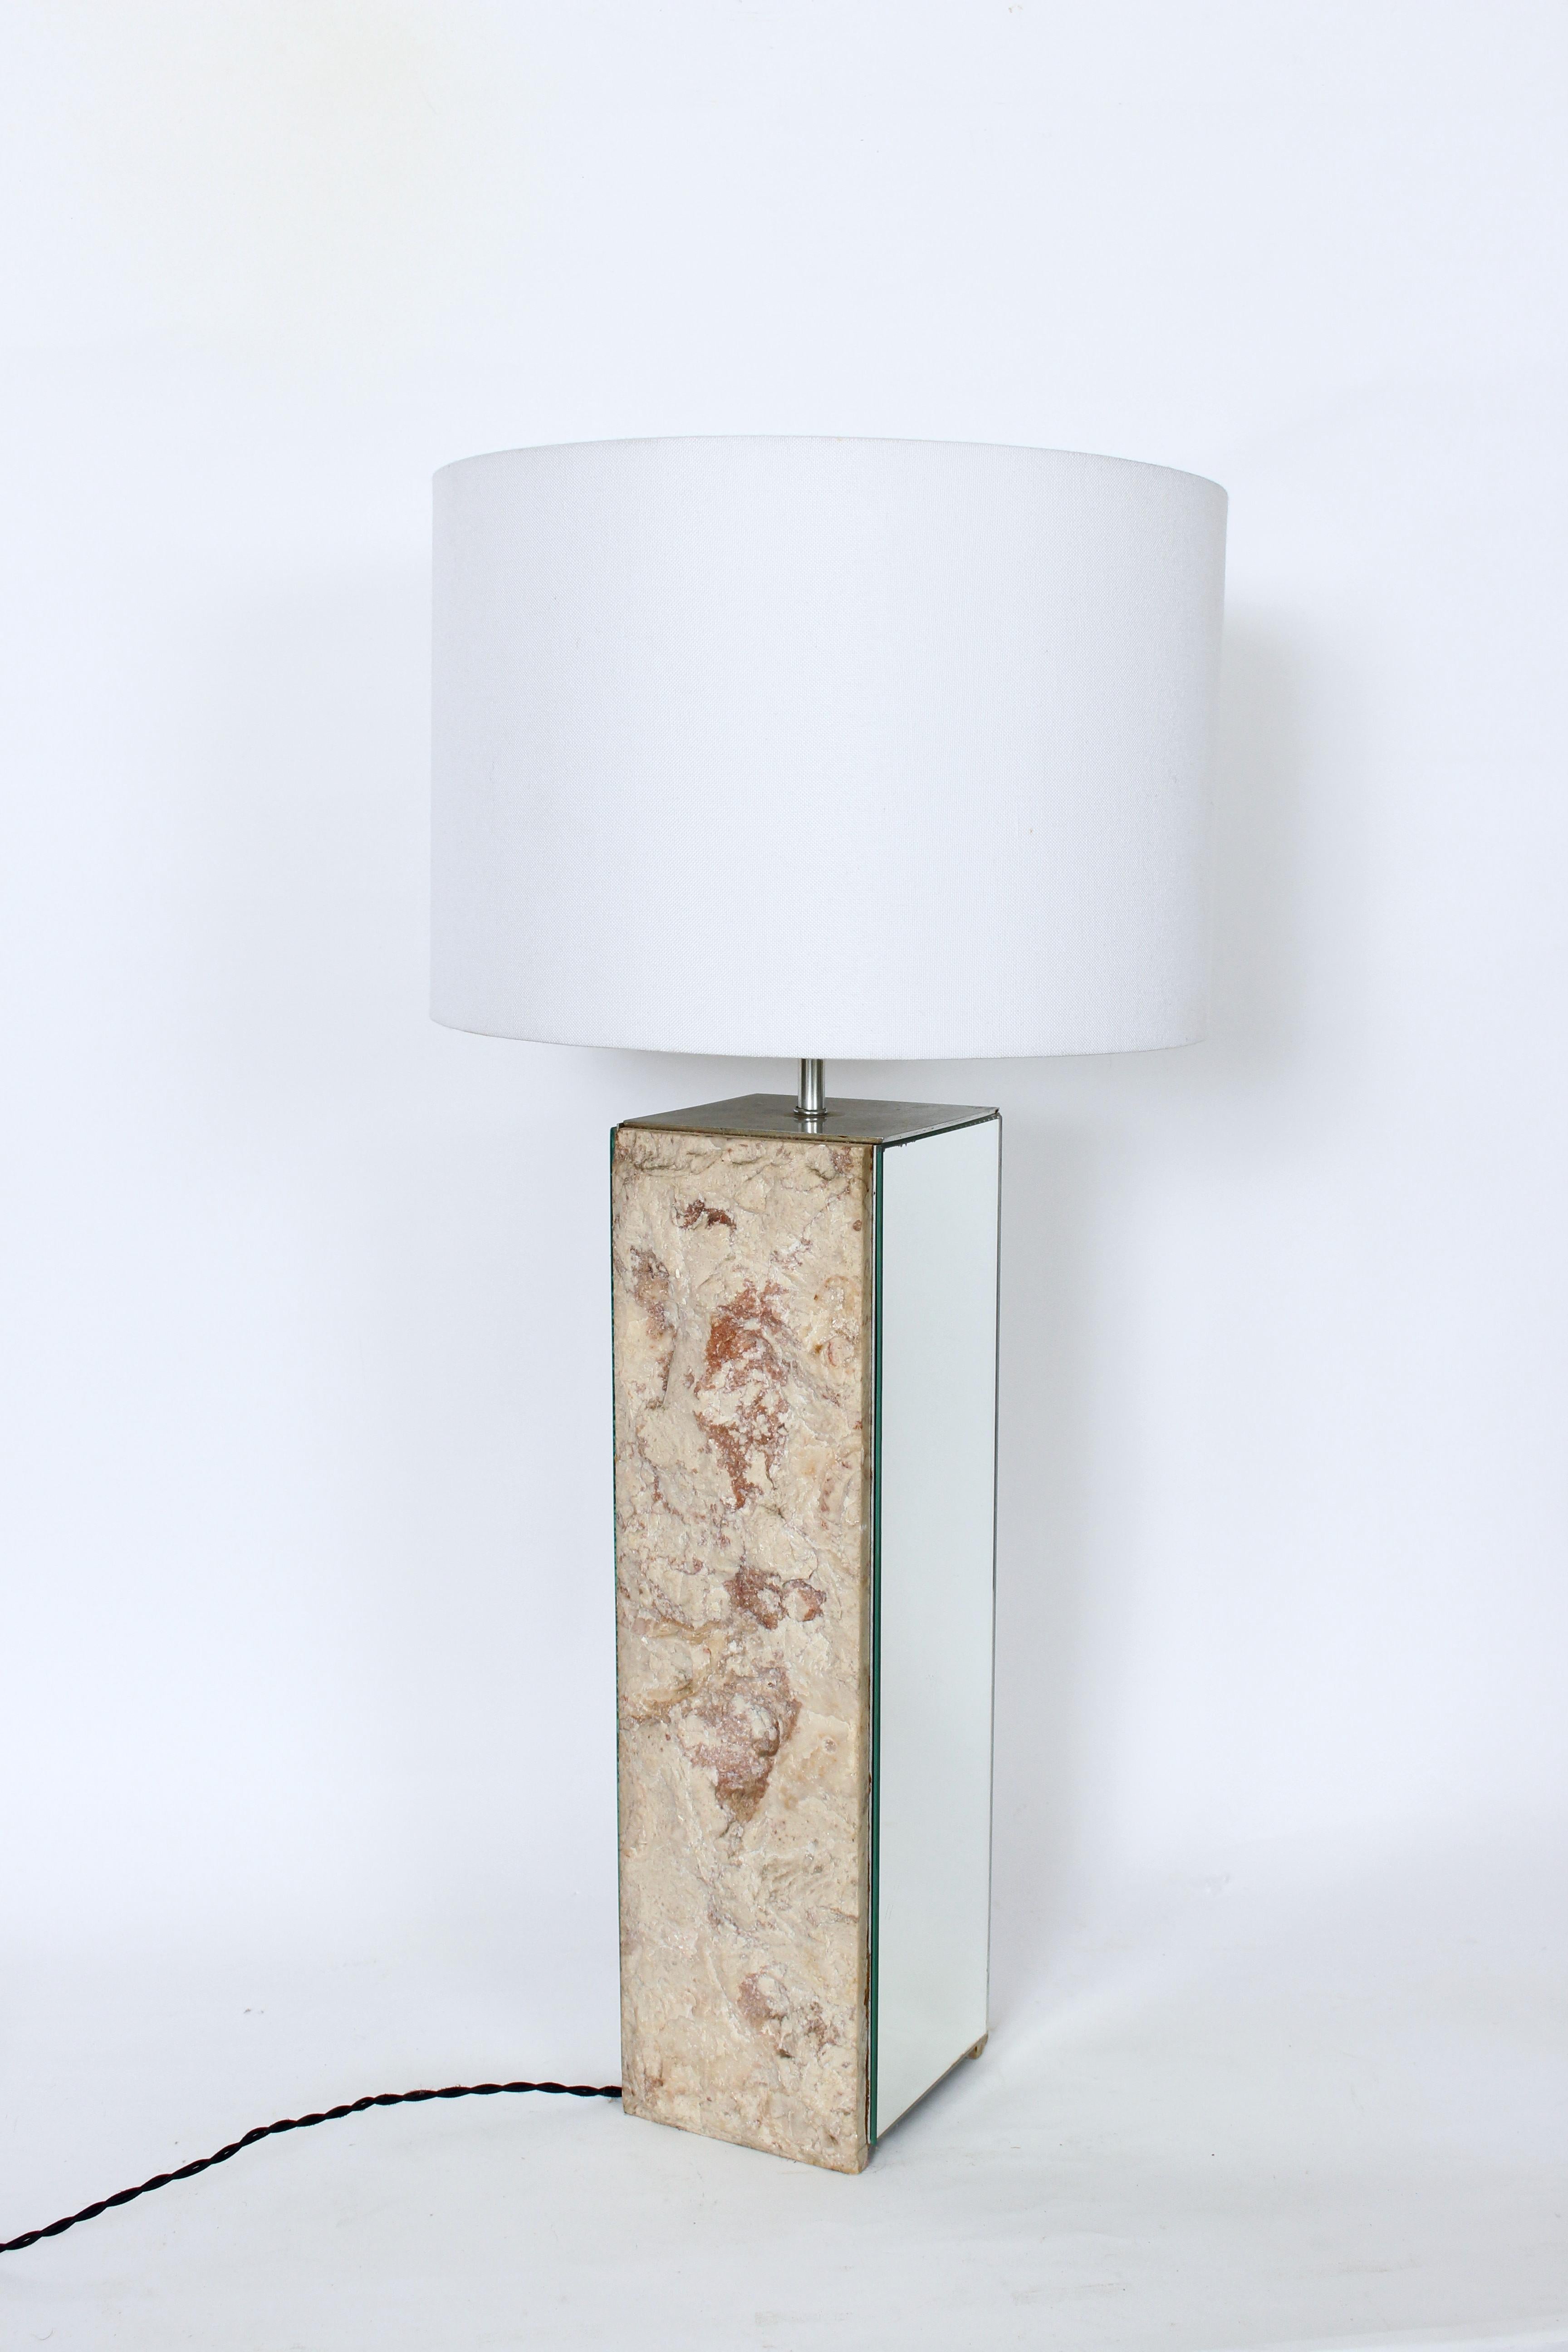 American Substantial Laurel Lamp Co. Travertine and Mirror Table Lamp, 1960s For Sale